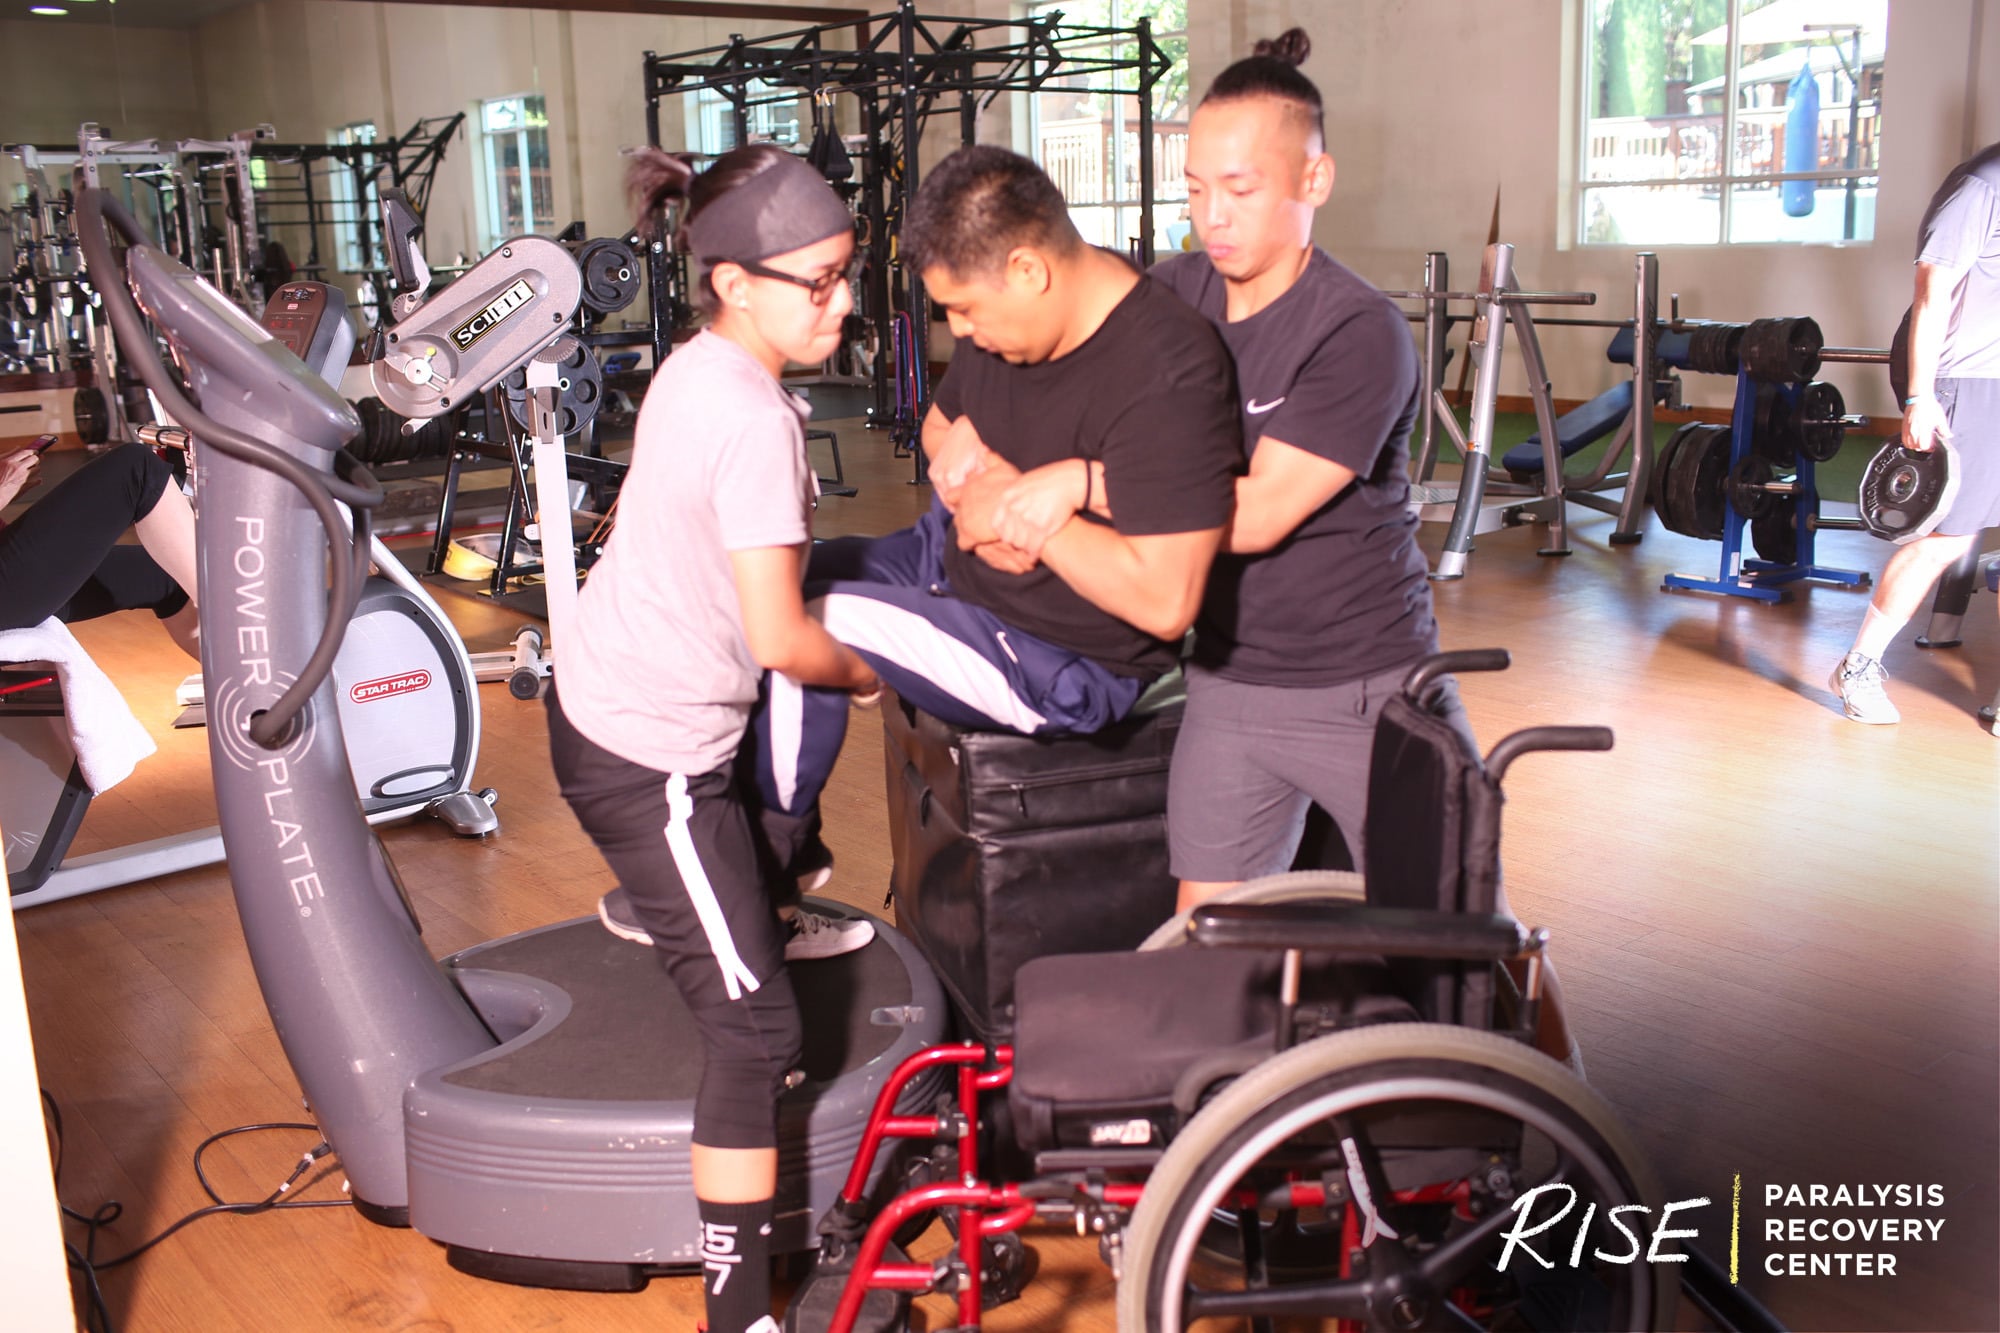 Two trainers help a man get out of his wheelchair onto a machine at the gym.